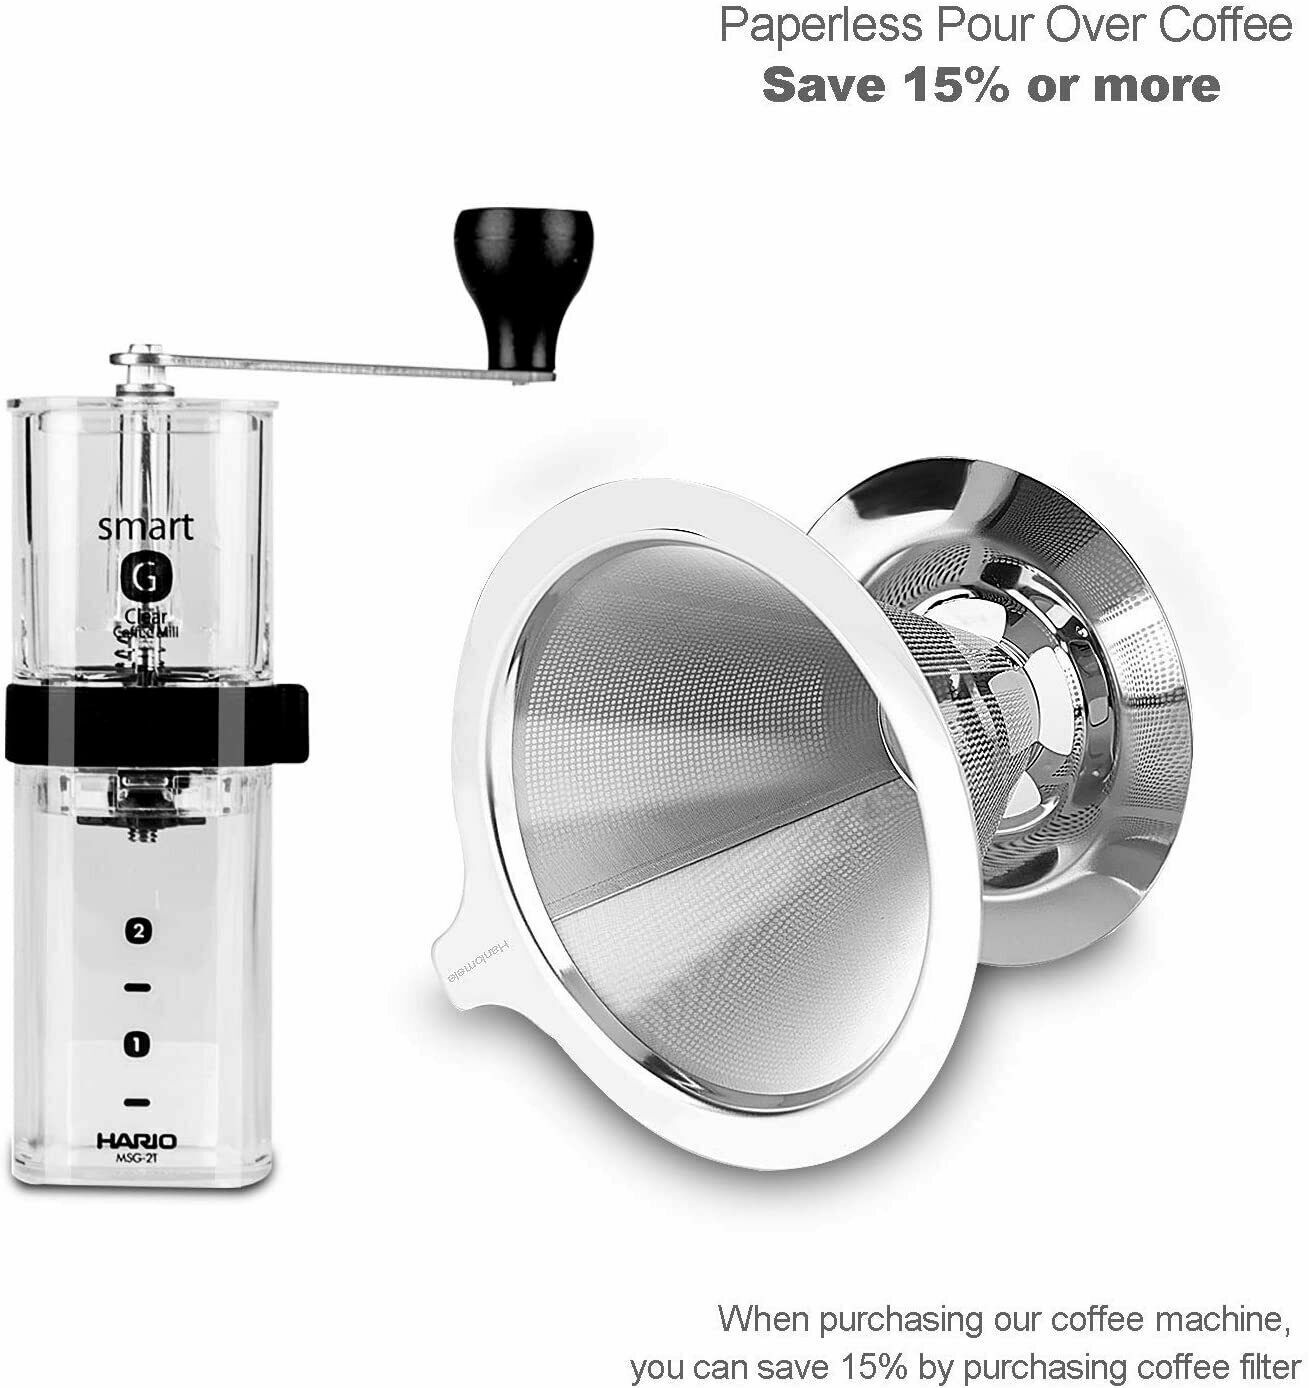 Reusable Coffee Tea Cup Drip Filter Mesh Holder Stainless Steel Pour Over Funnel